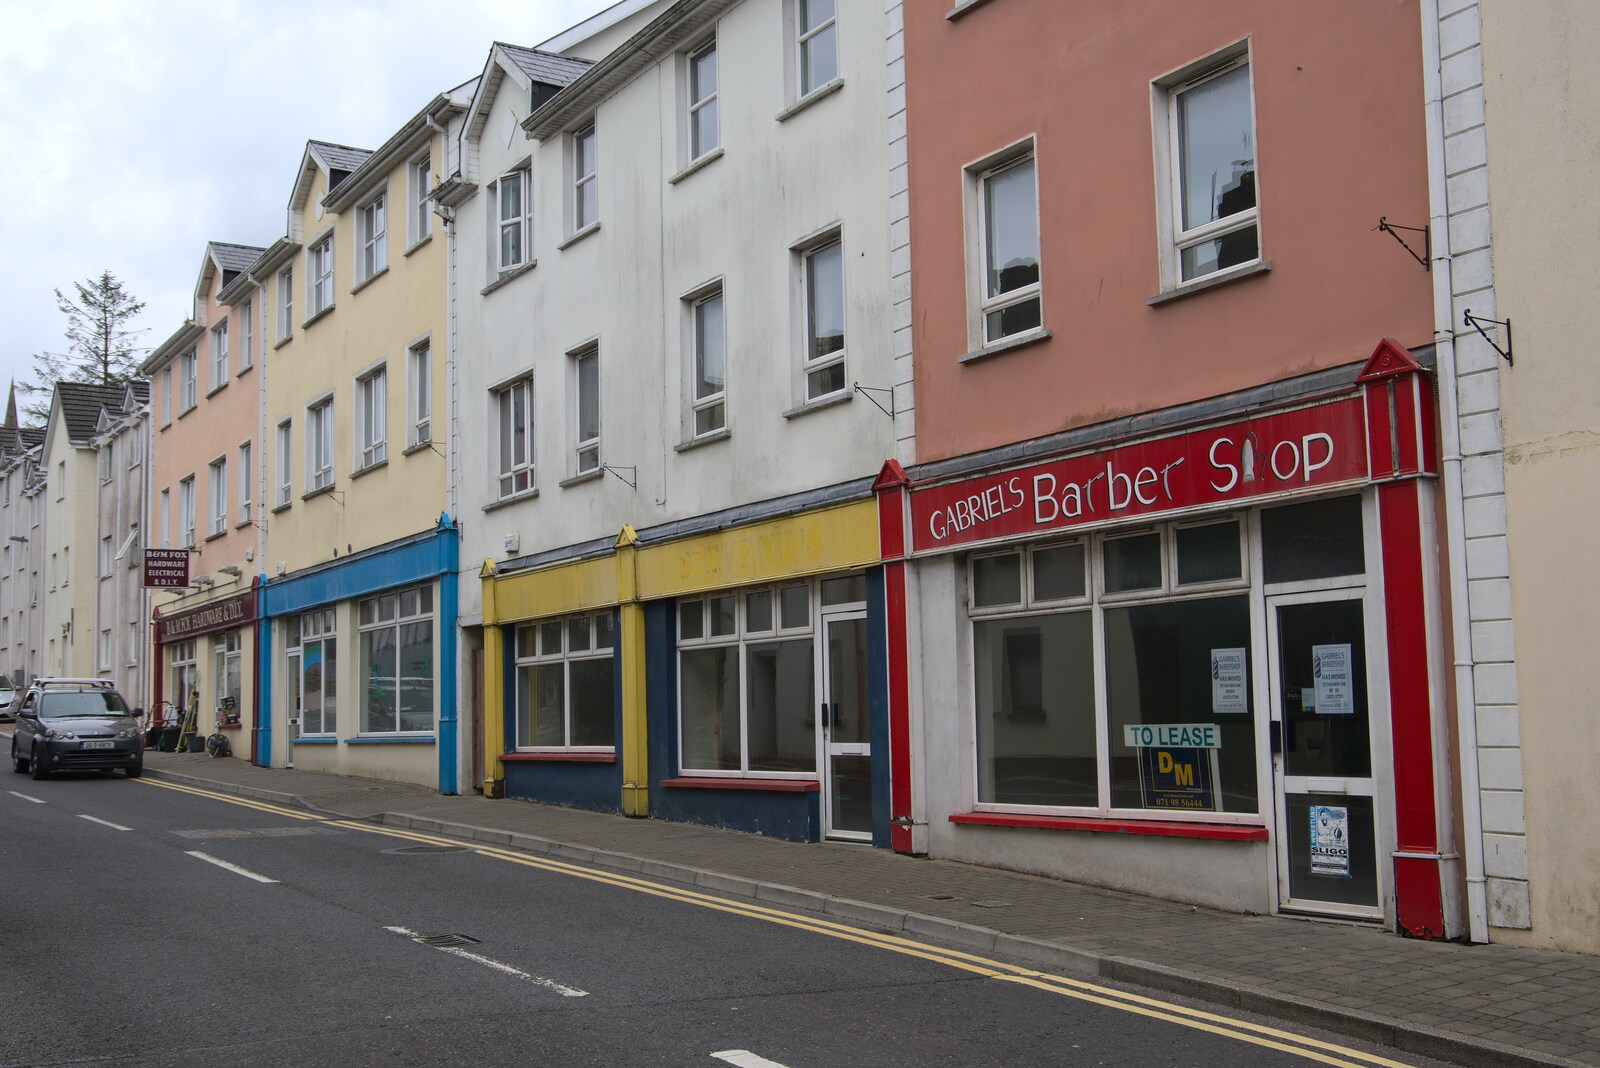 A Trip to Manorhamilton, County Leitrim, Ireland - 11th August 2021: Empty shops on Temple Lane